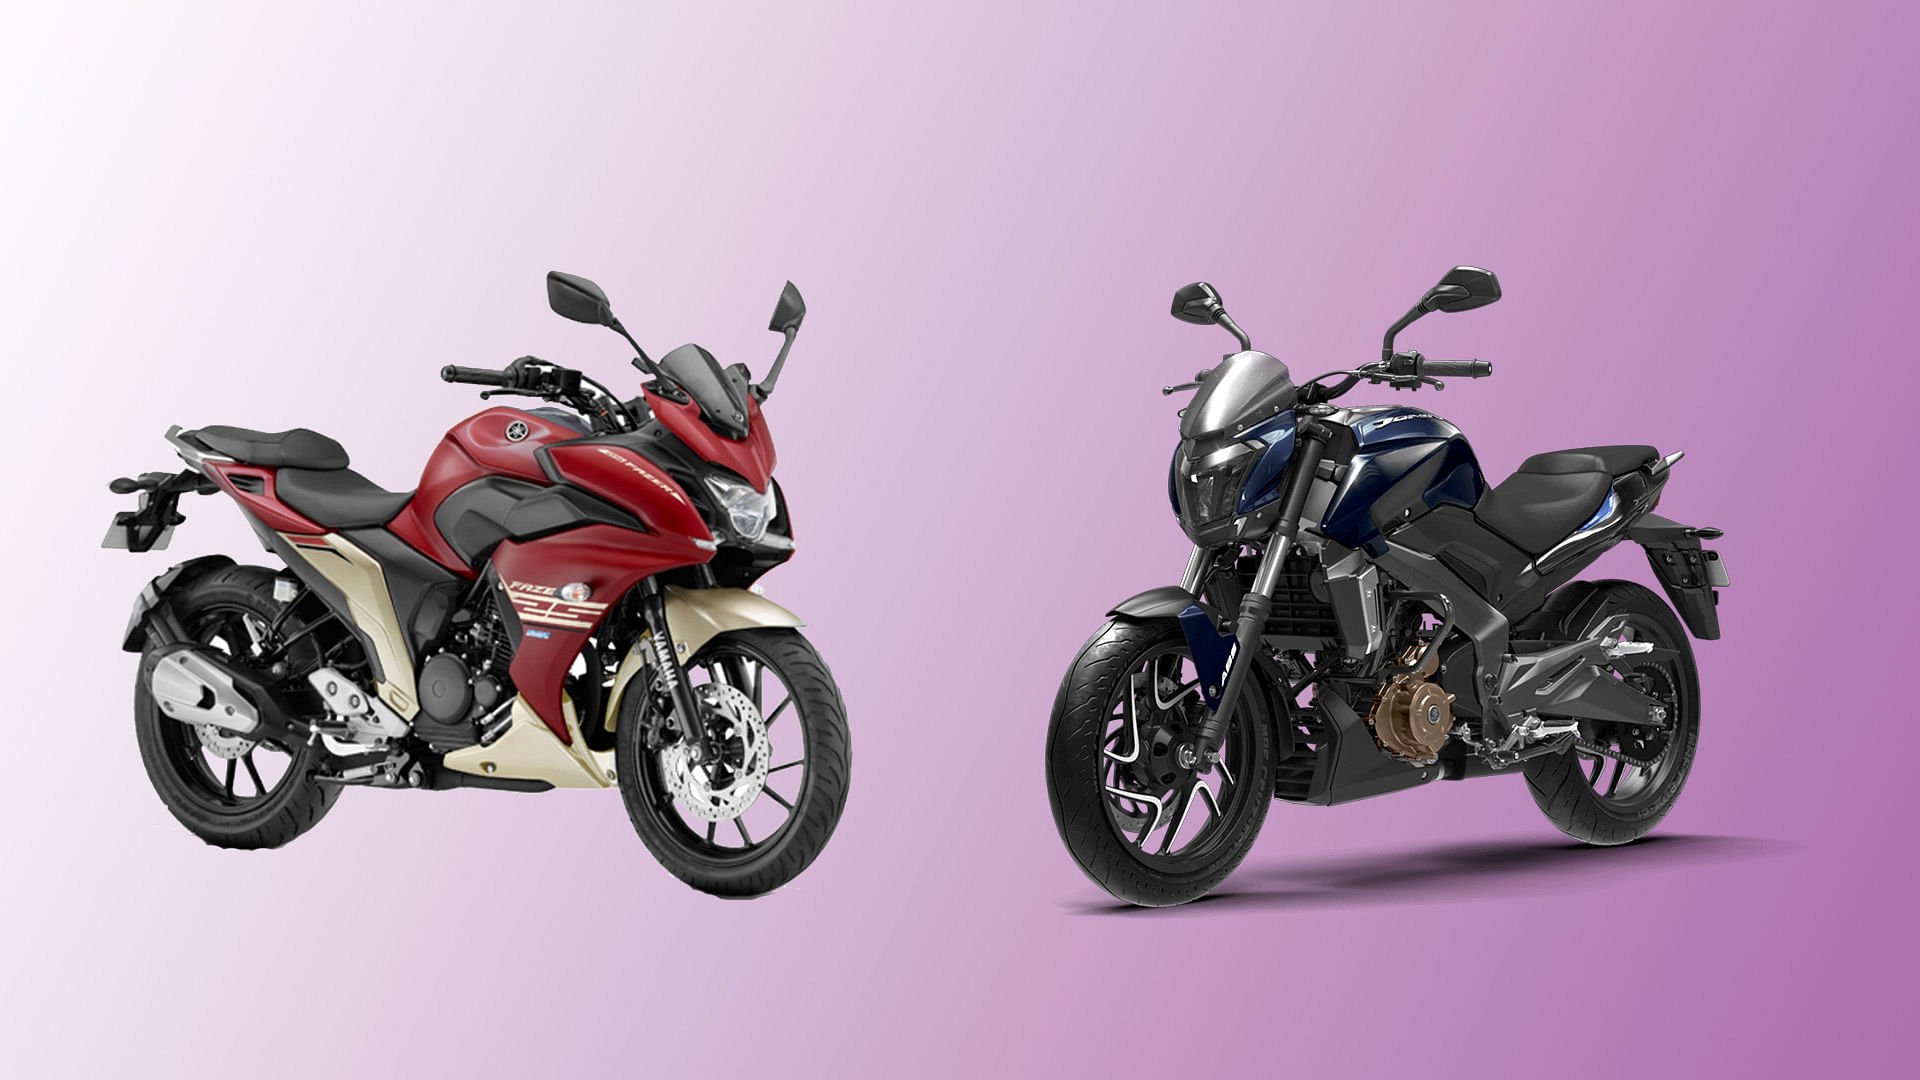 Yamaha Fazer 25 (left) and Bajaj Dominar 400 (right) both support dual-channel ABS.&nbsp;